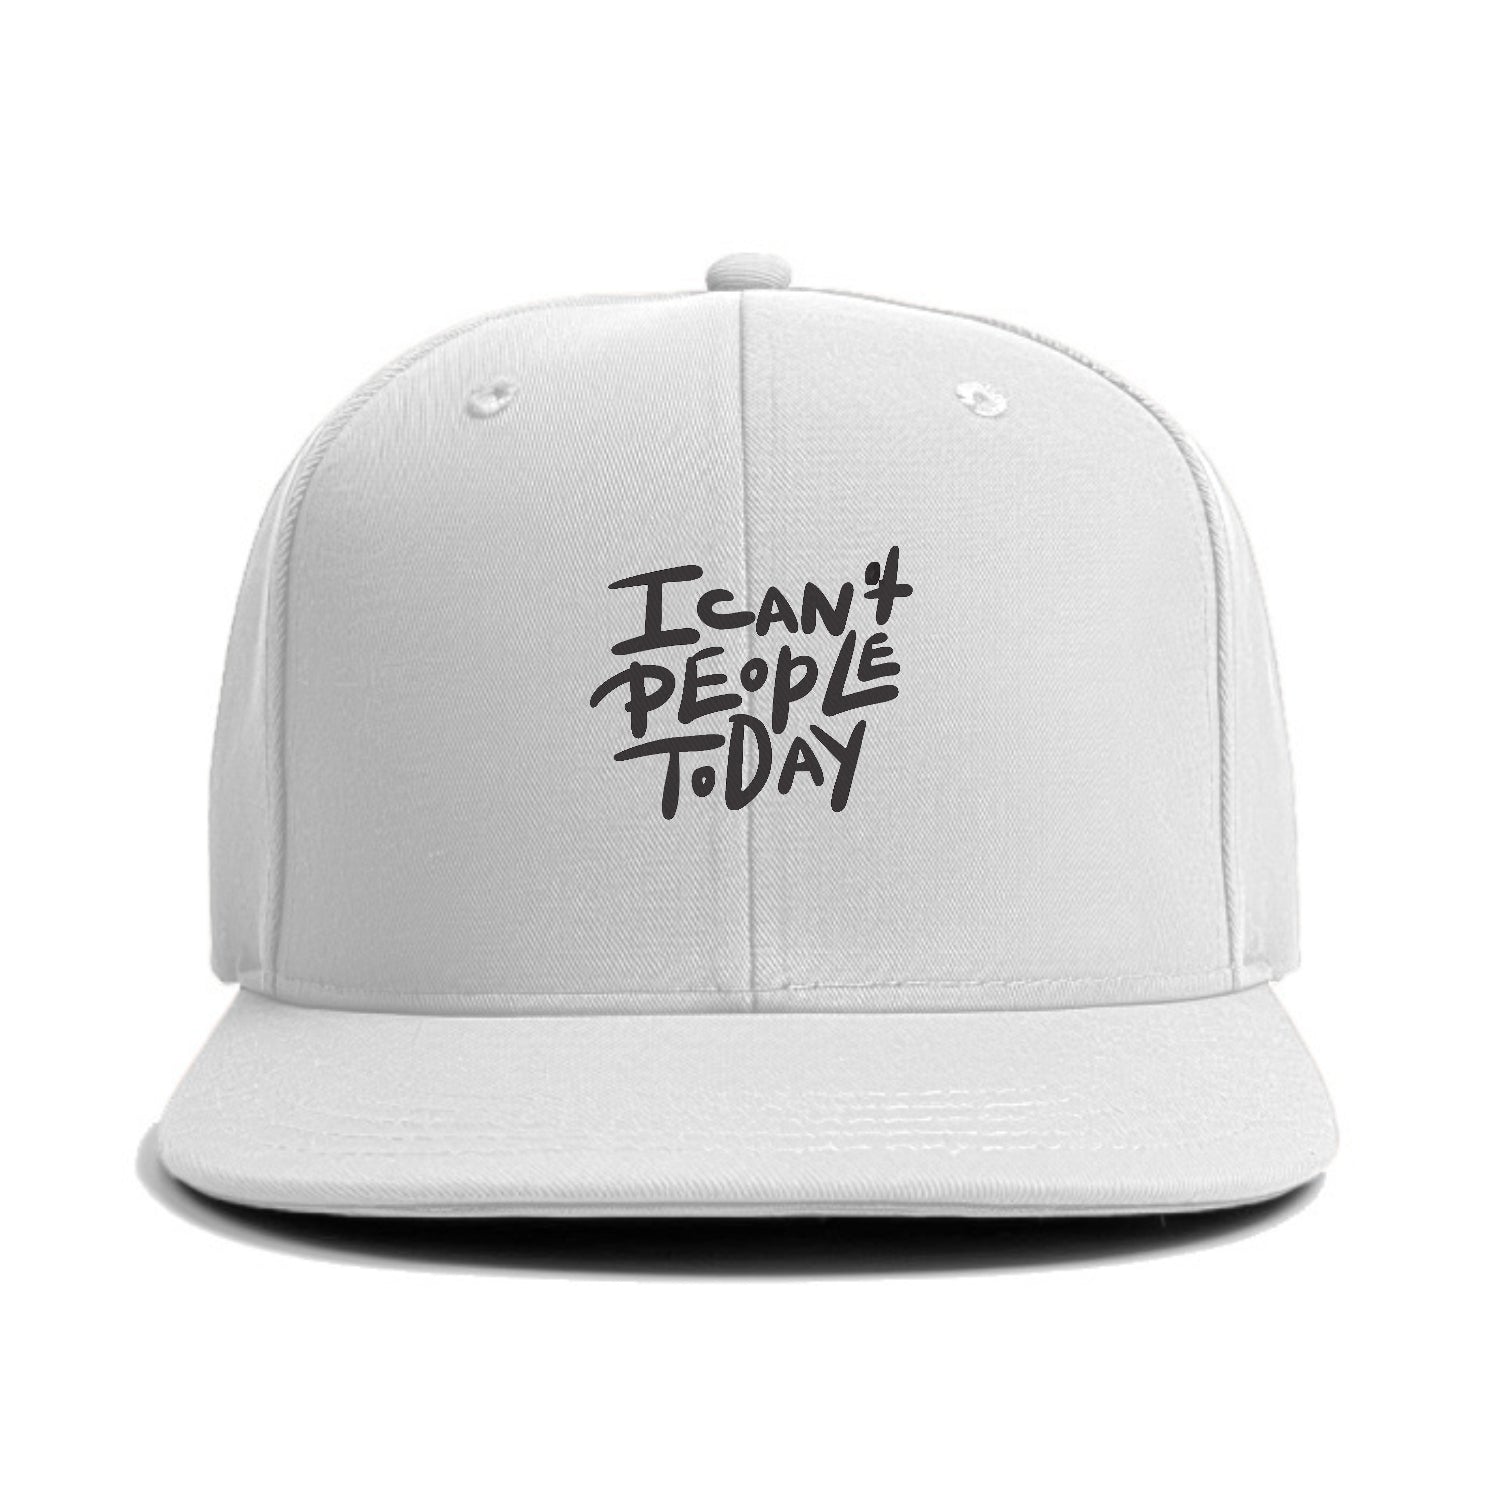 i can't people today Hat